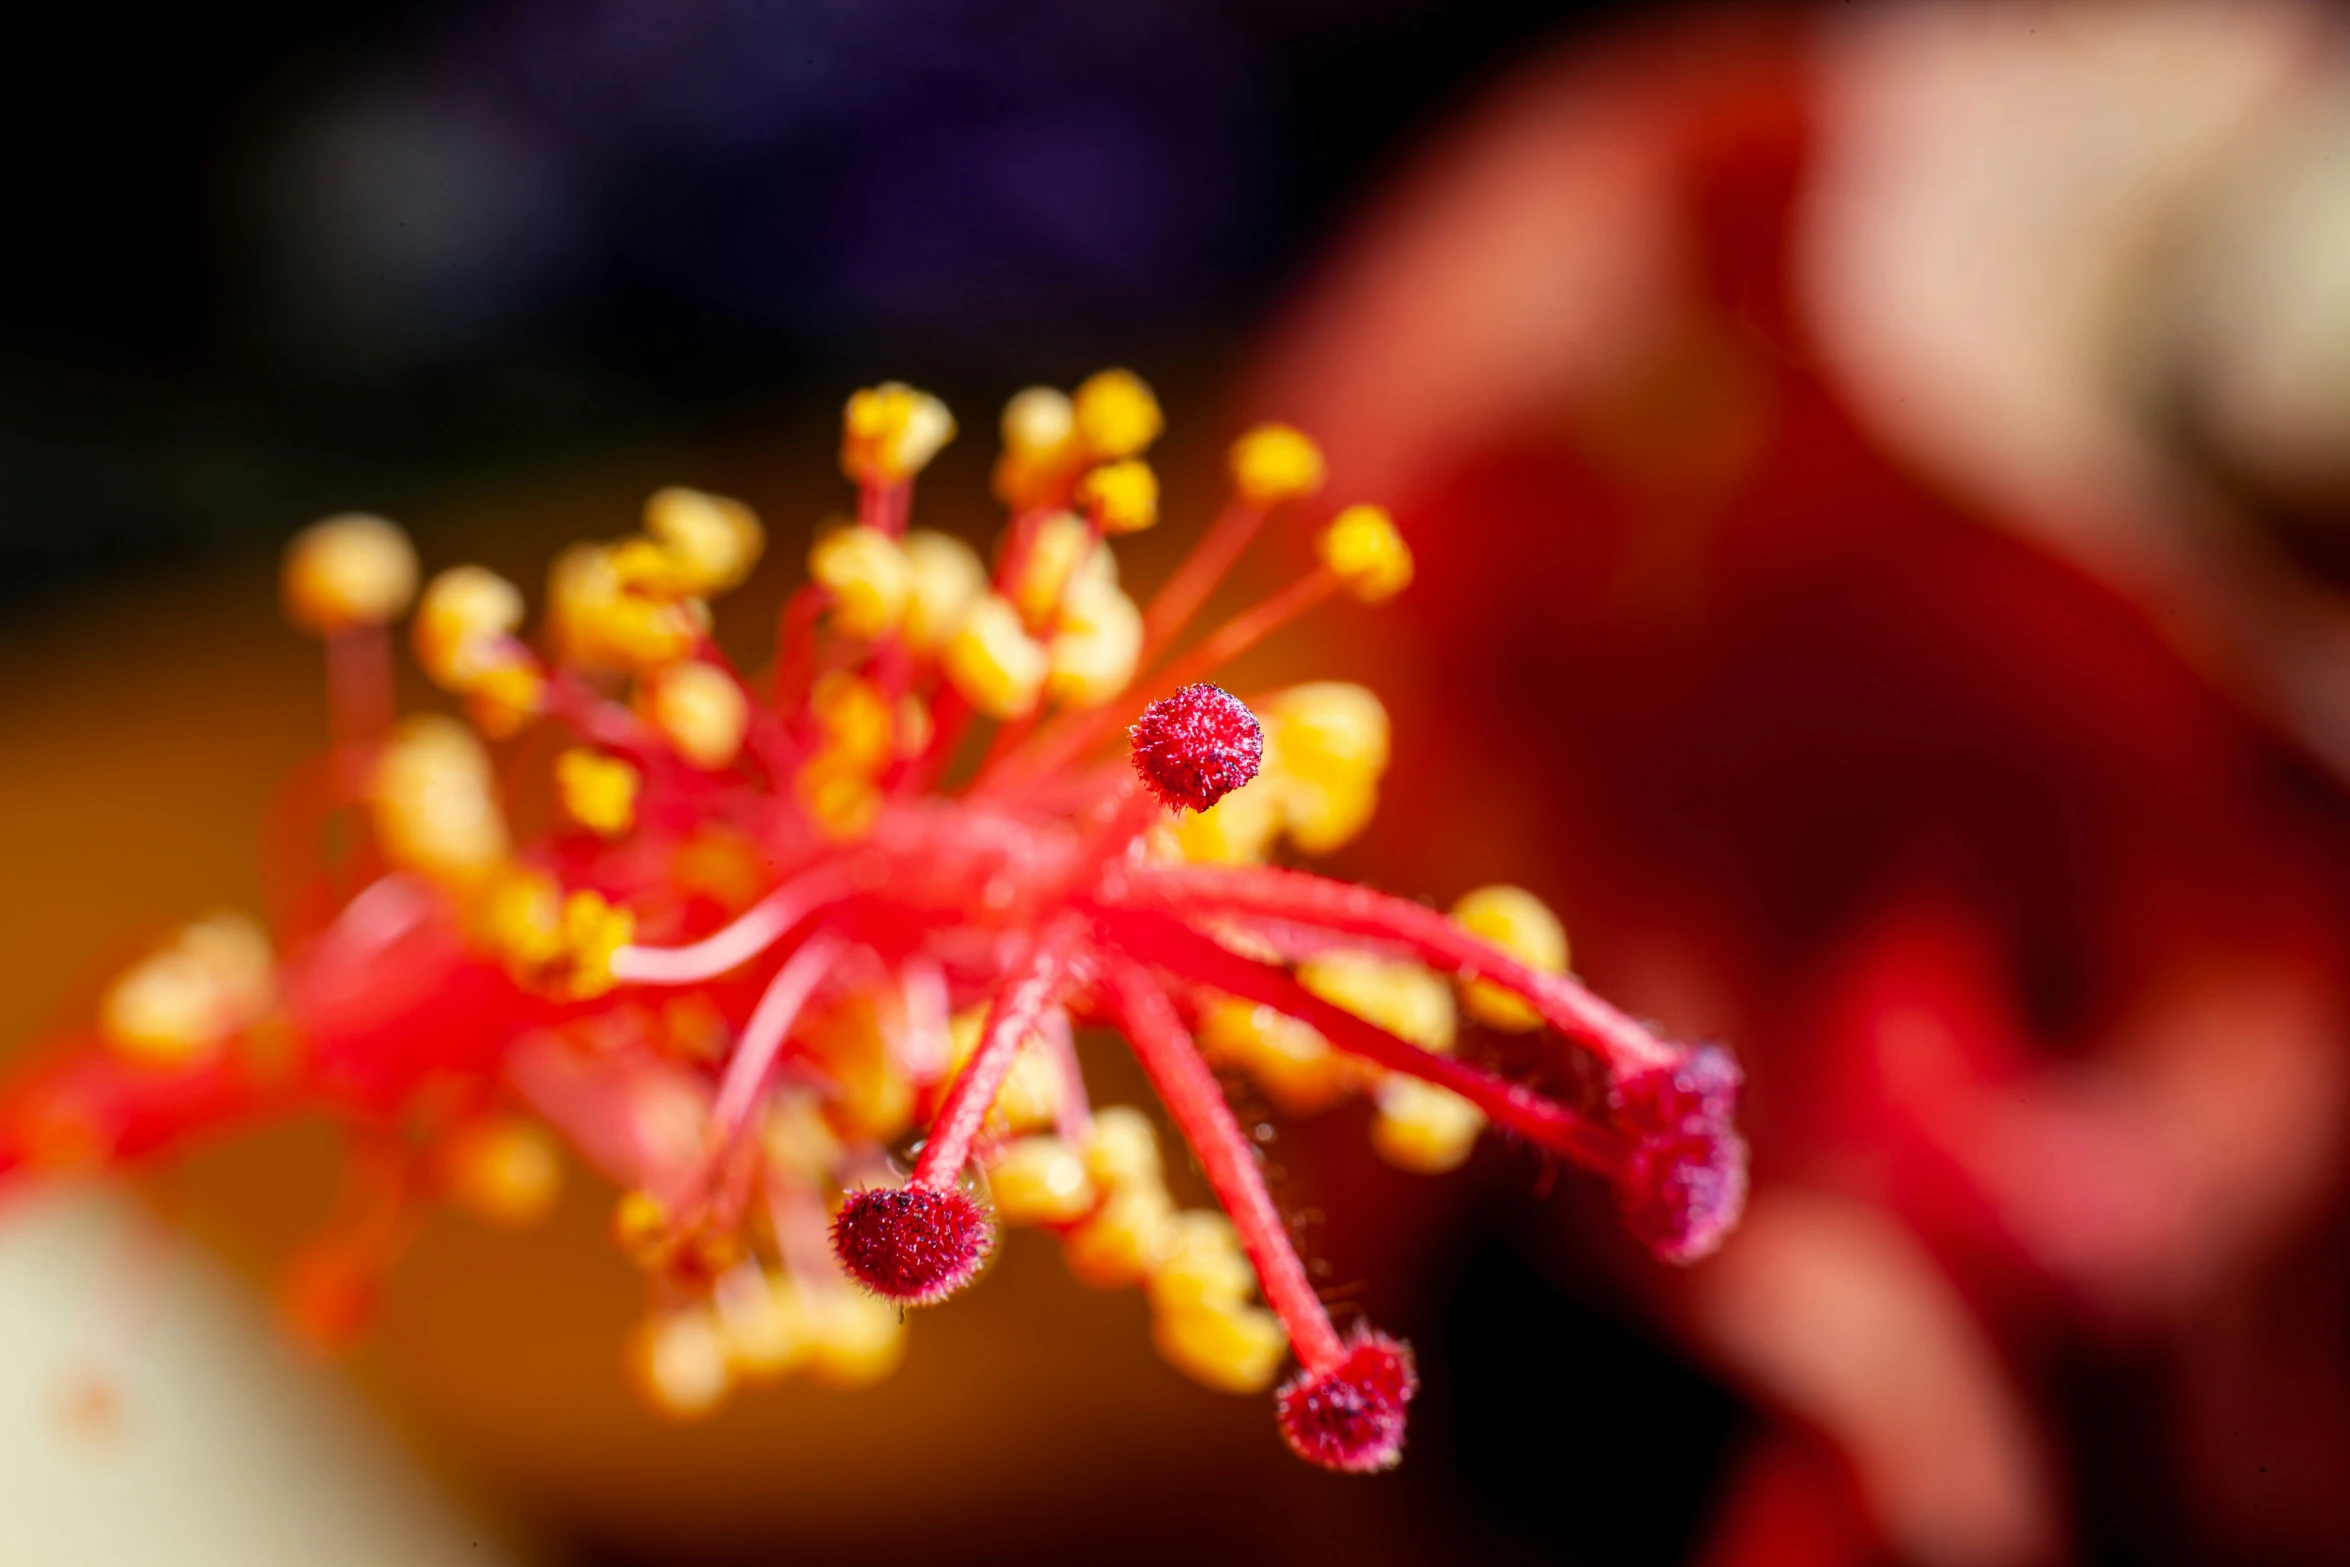 red flowers with yellow stamens around it